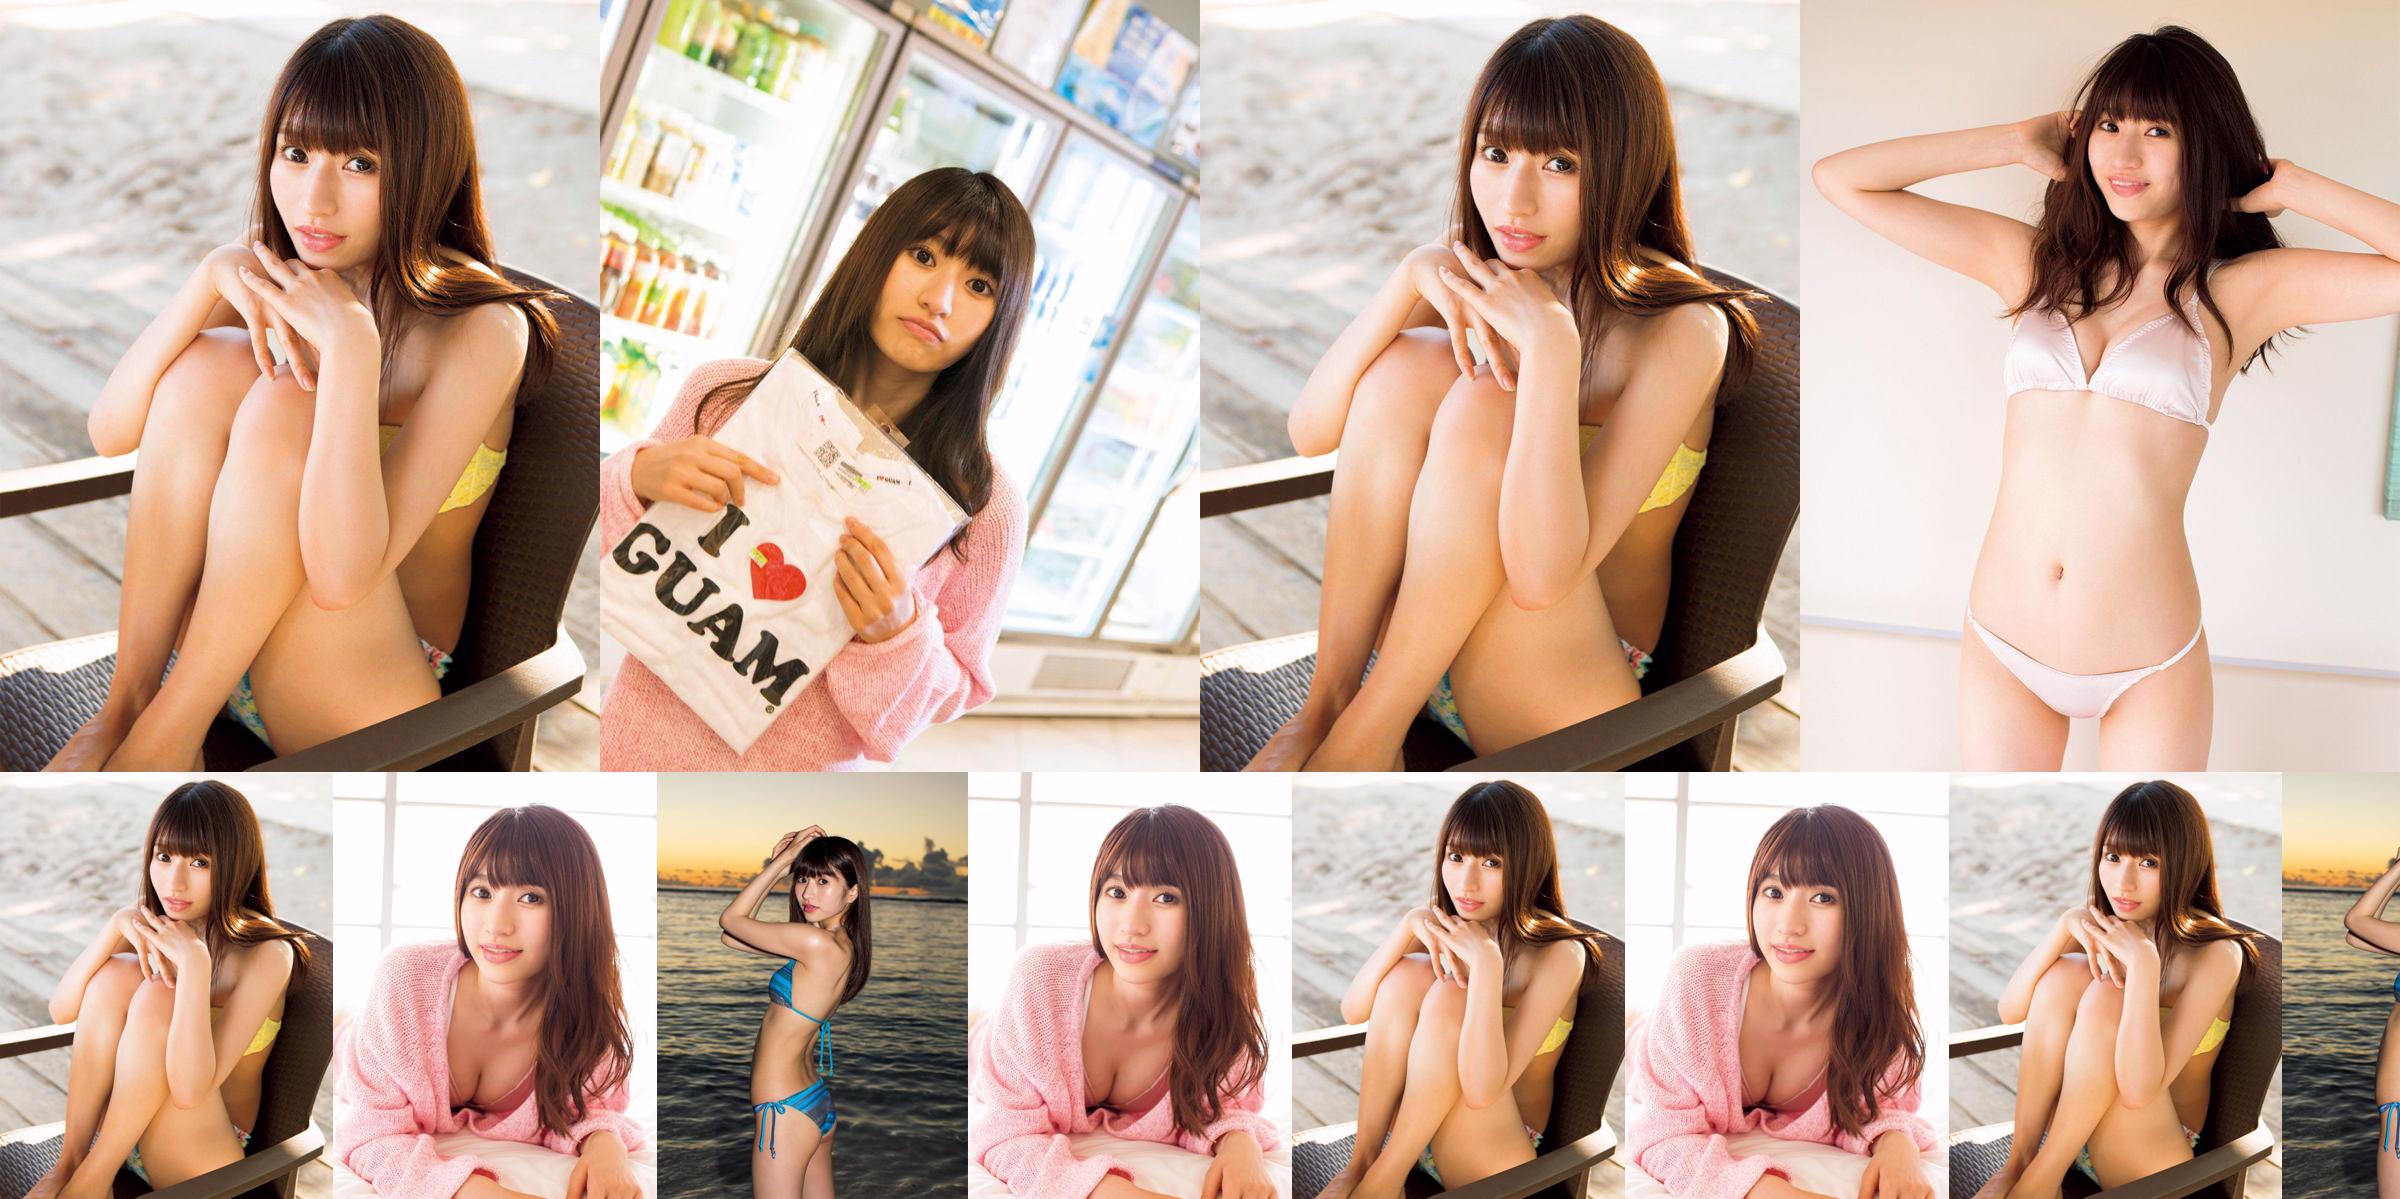 [FRIDAY] Rion "Small Devil Beauty" Photo No.f67a29 Page 1